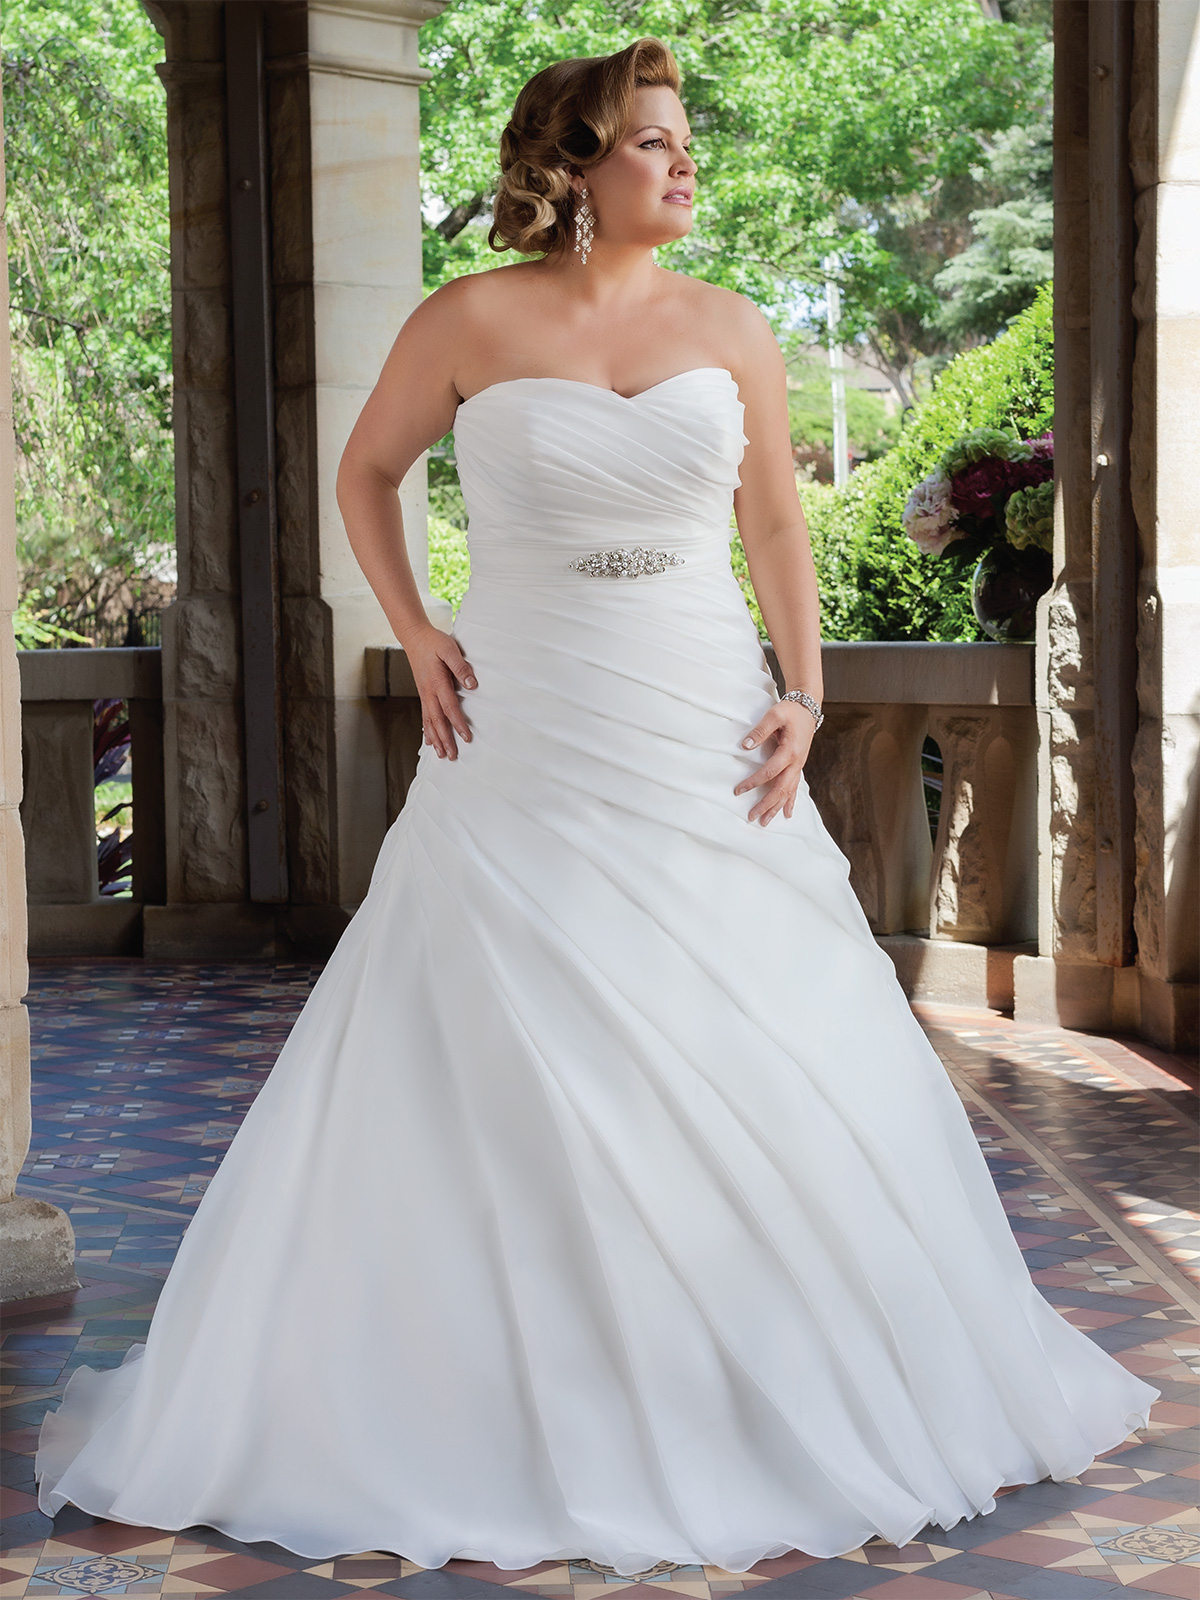 Elegant Wedding Dresses For Plus Size Top 10 Find The Perfect Venue For Your Special Wedding Day 7273